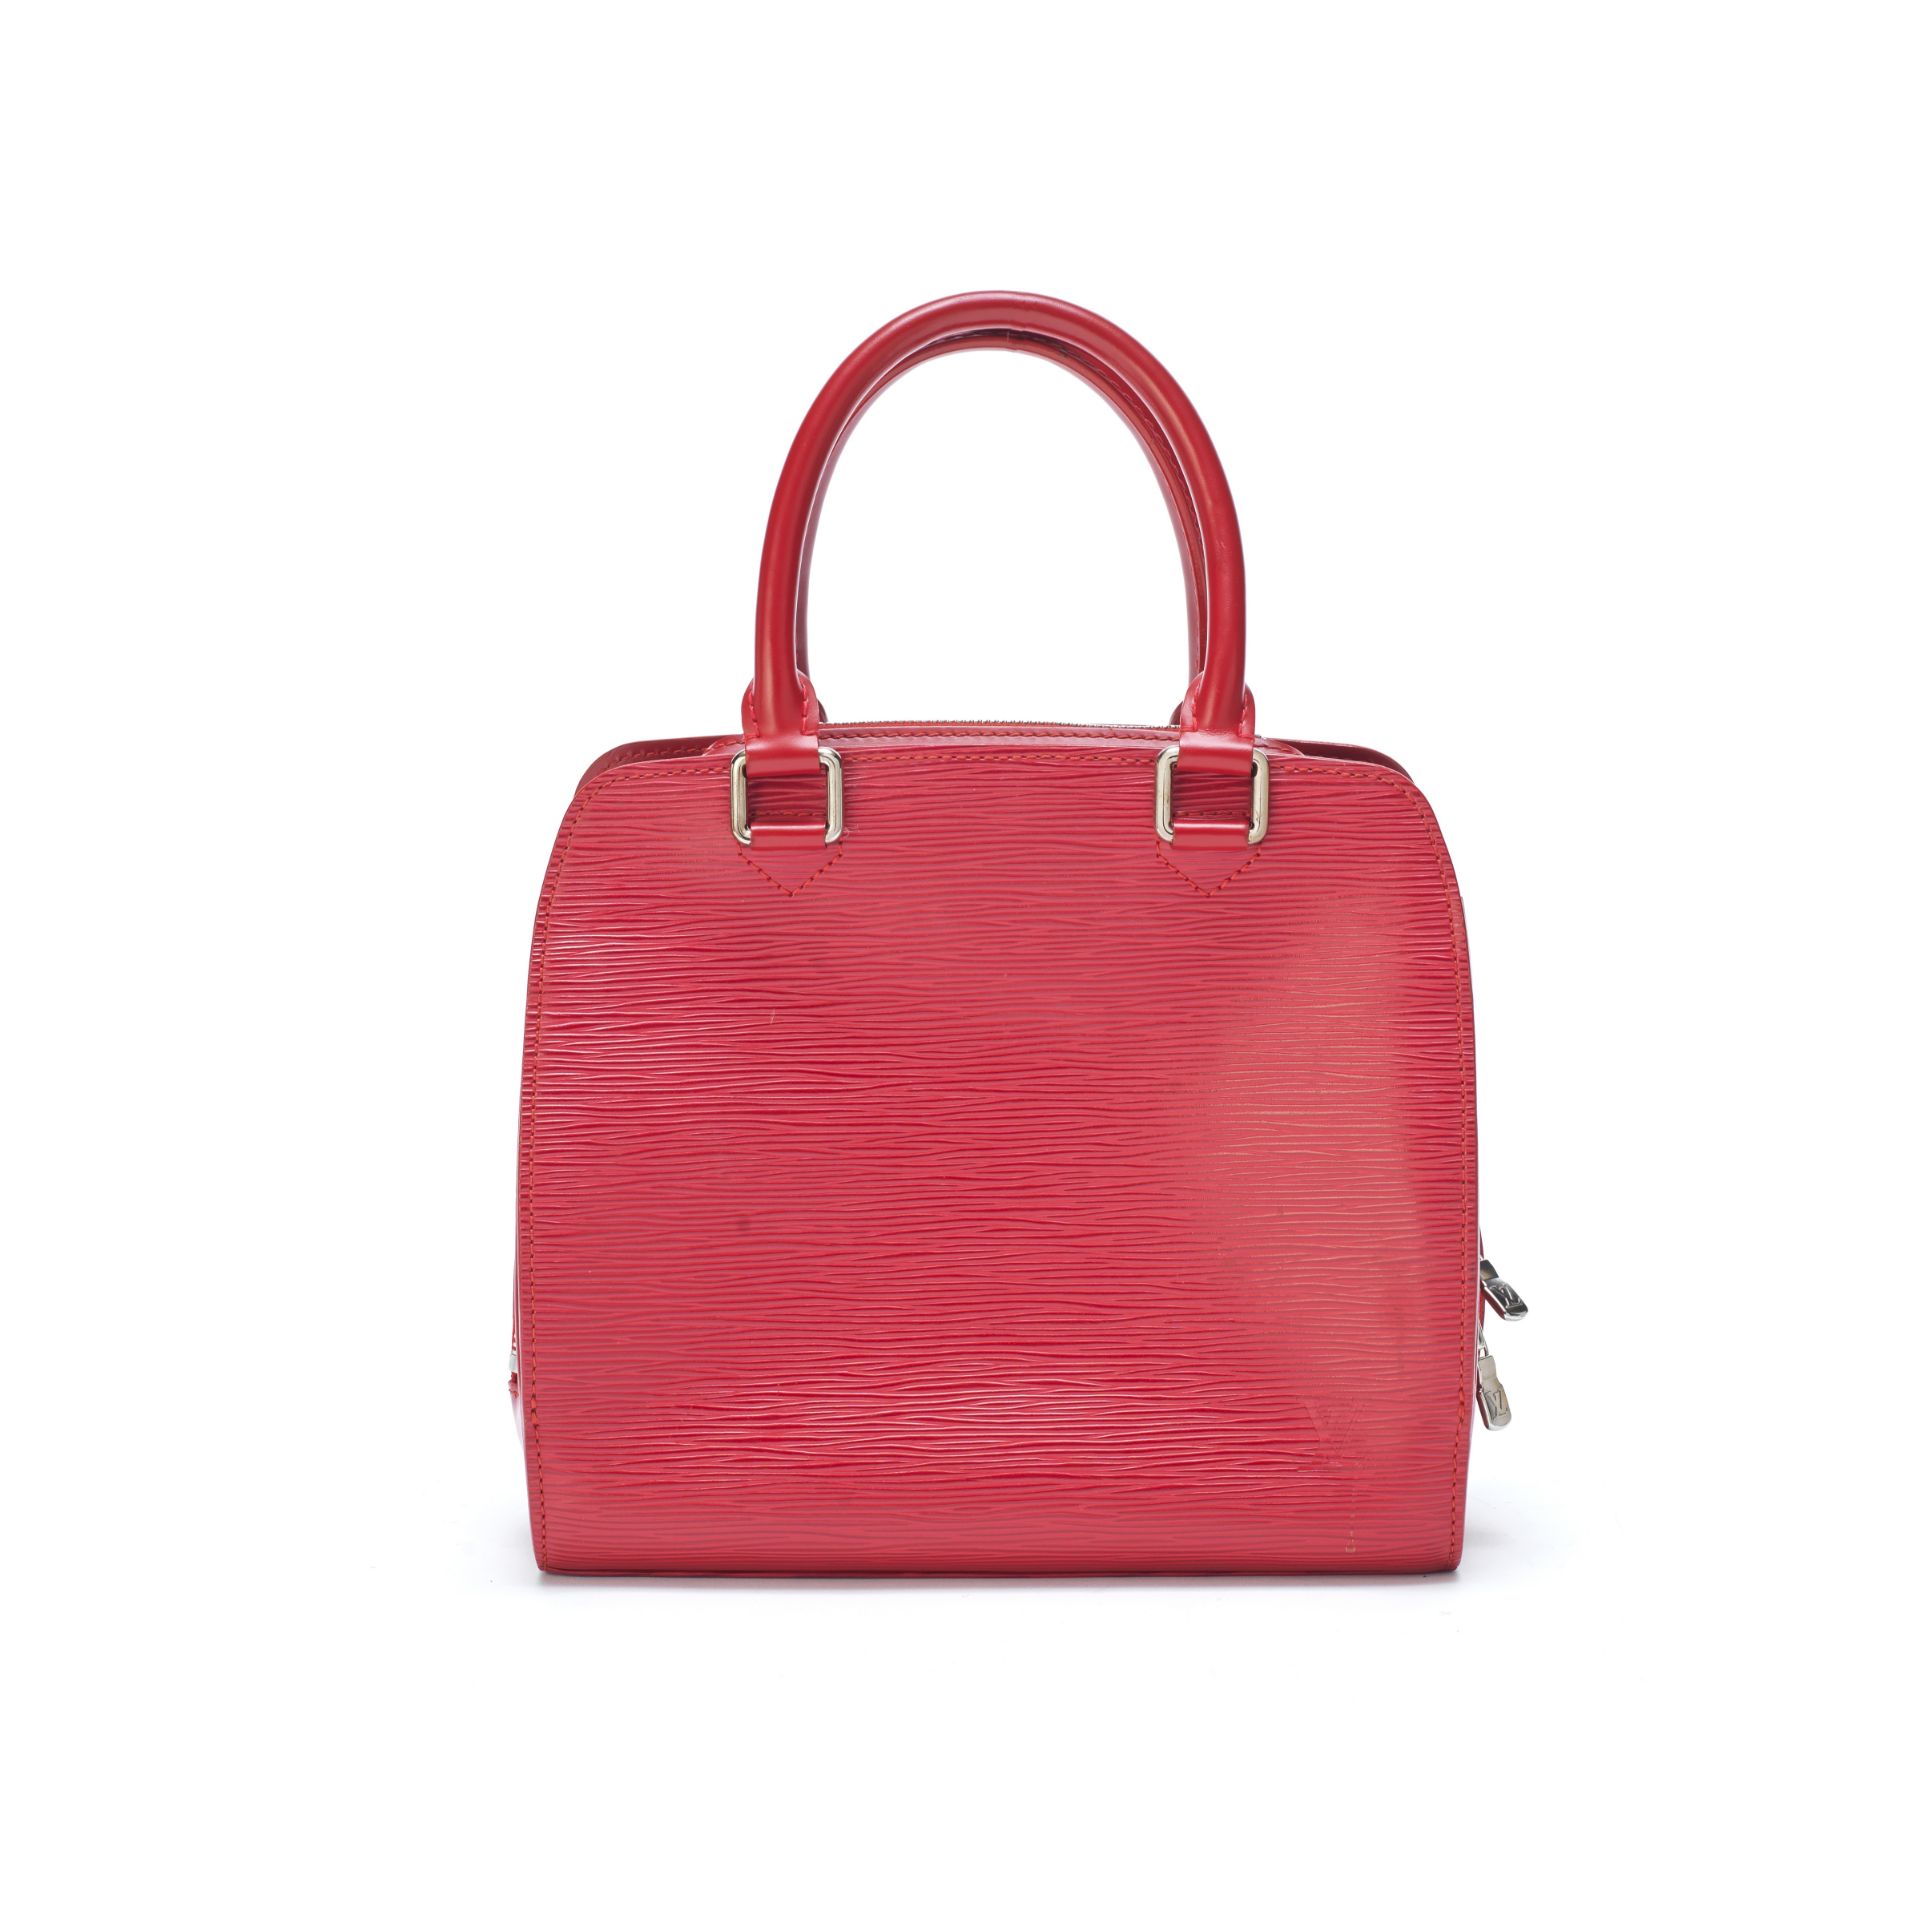 Red Epi Pont-Neuf Bag, Louis Vuitton, c. 2006, (Includes dust bag and box)